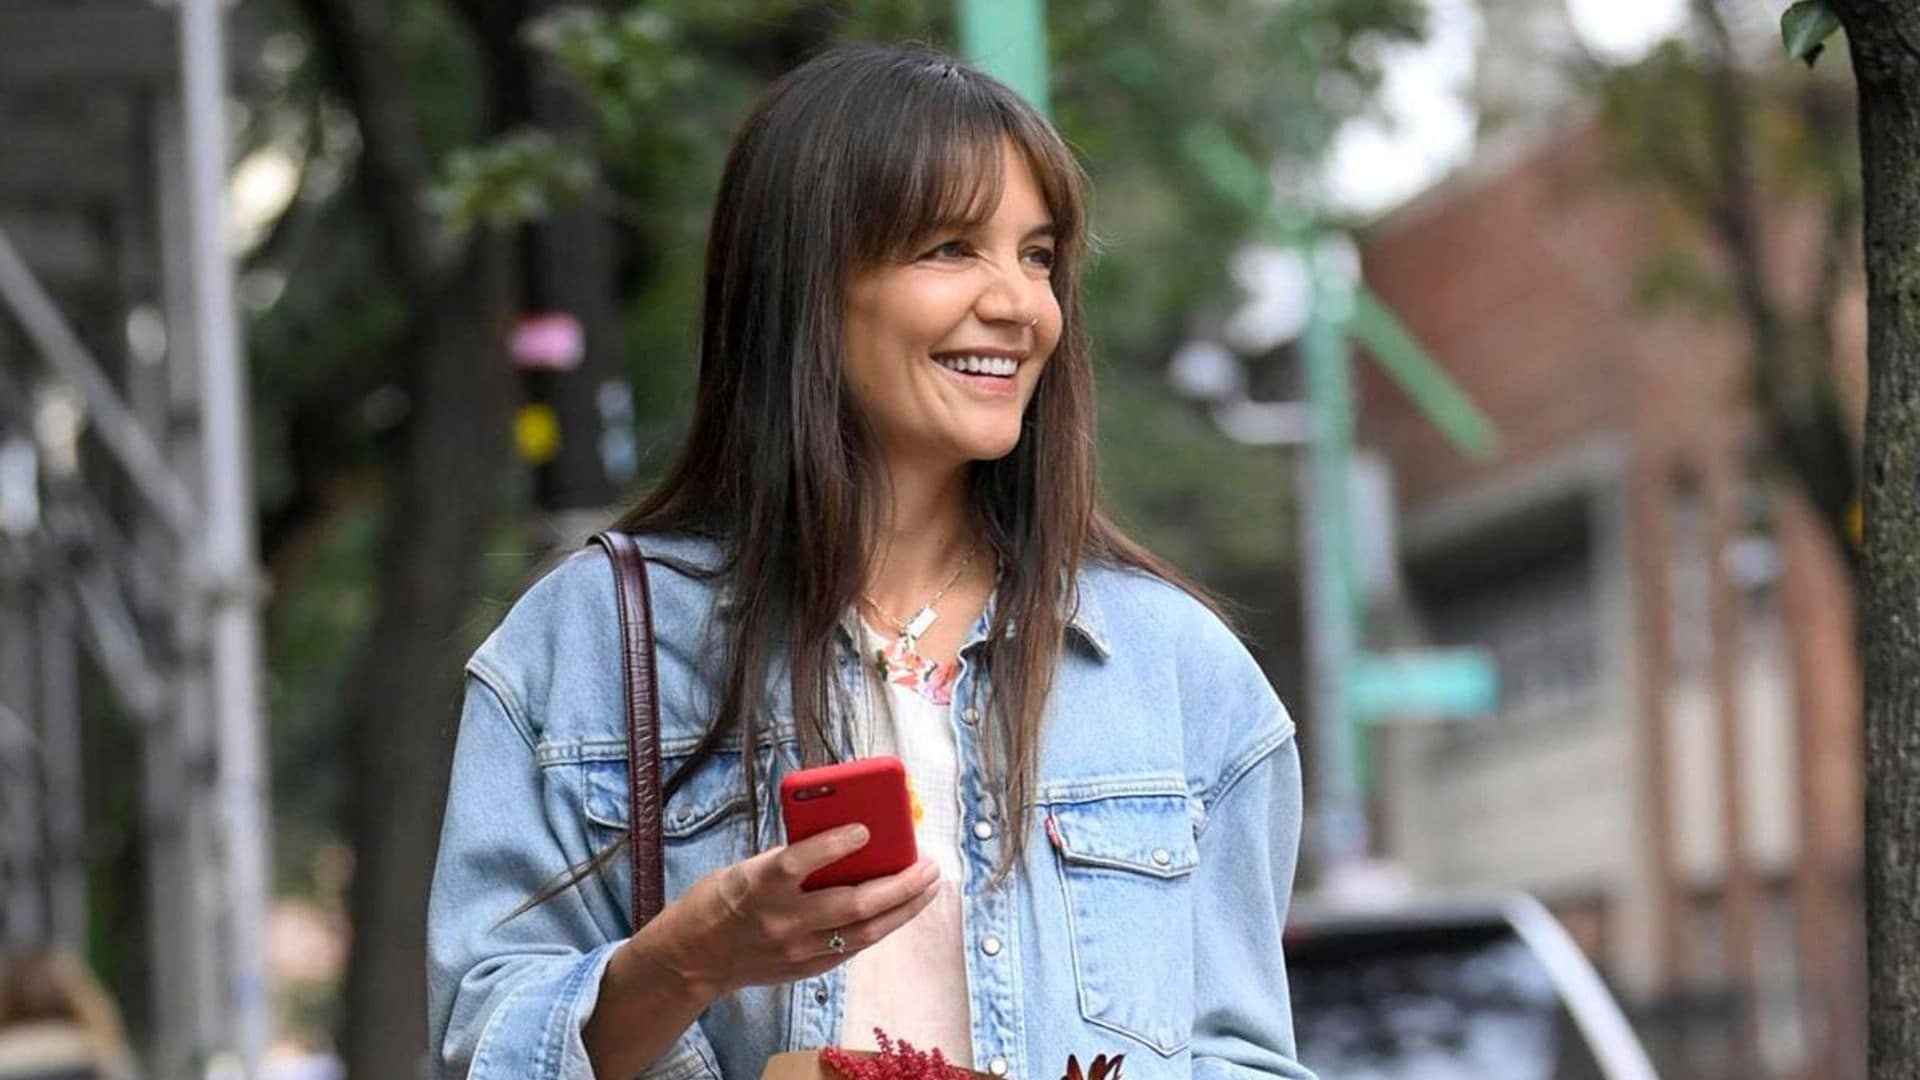 Katie Holmes nurtures her artistic soul as she embarks on an art supplies adventure in NYC